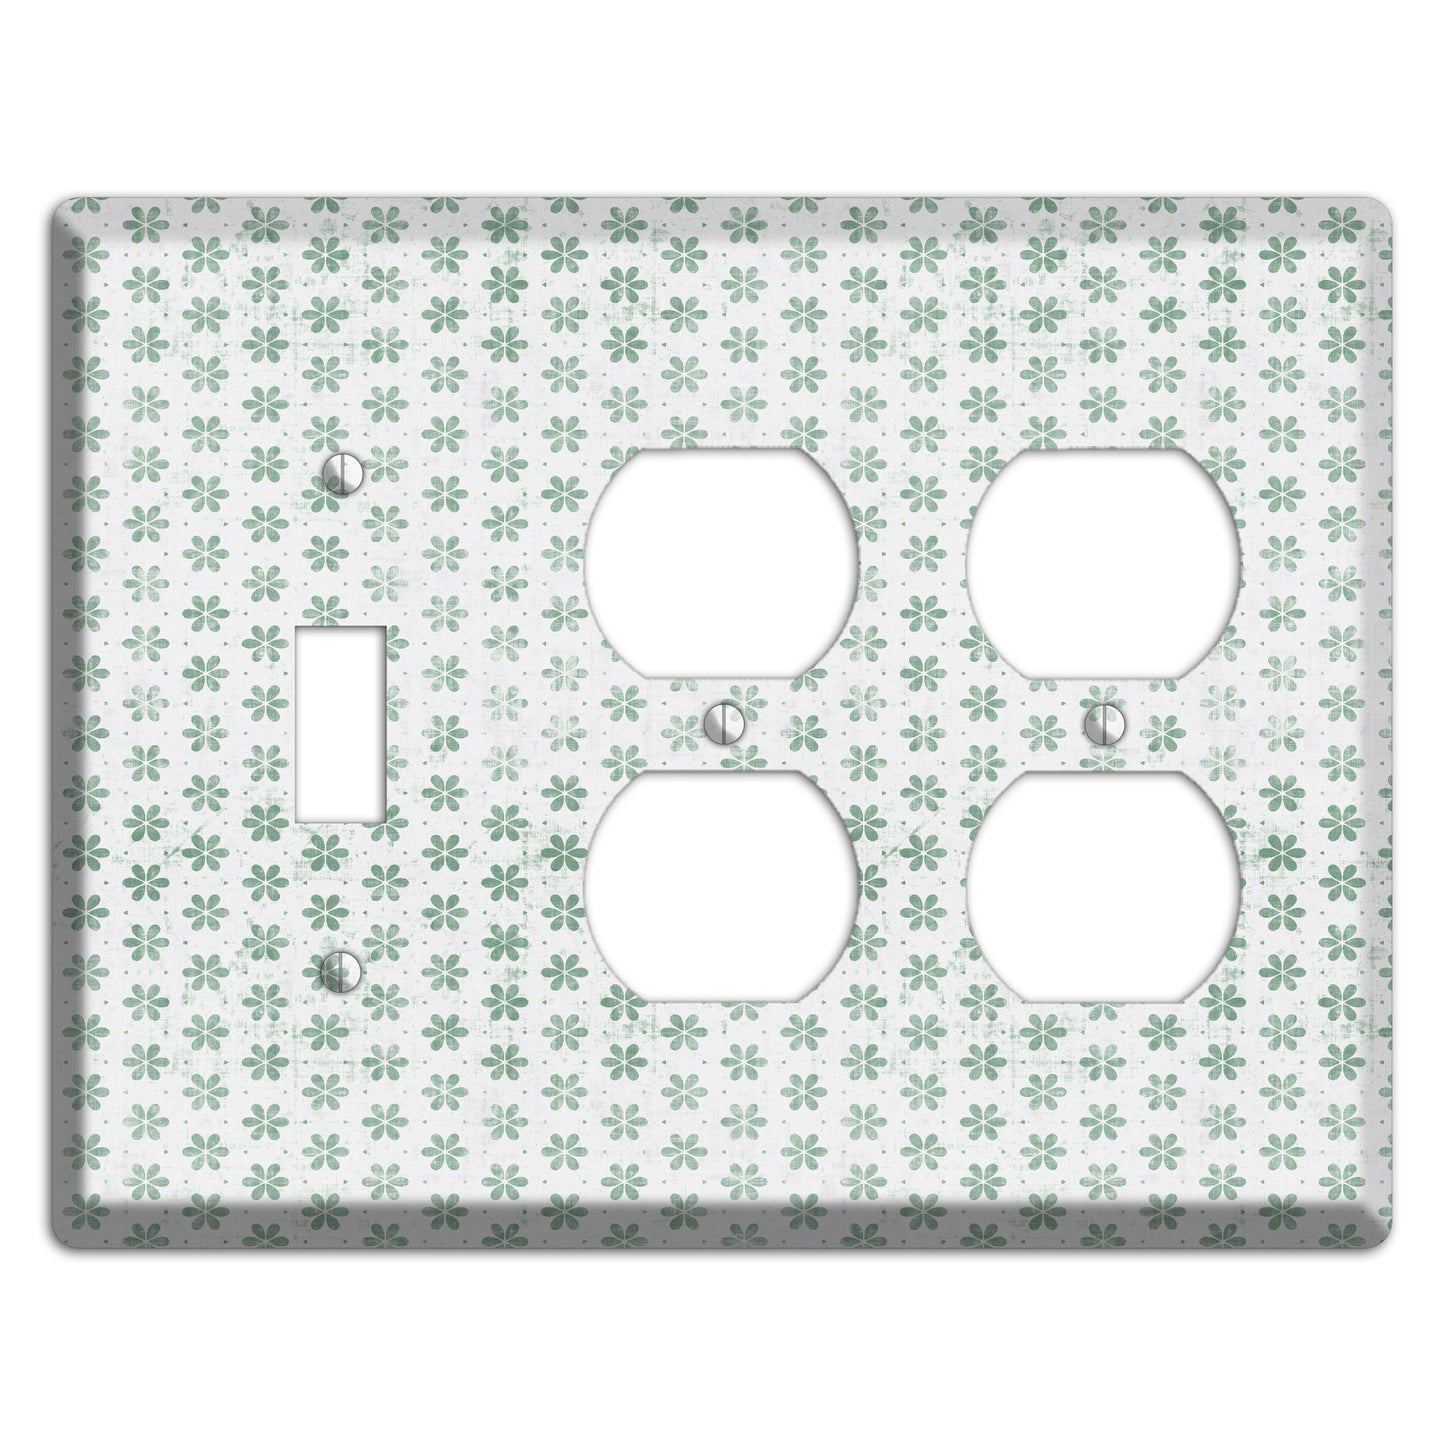 White with Green Grunge Floral Contour Toggle / 2 Duplex Wallplate